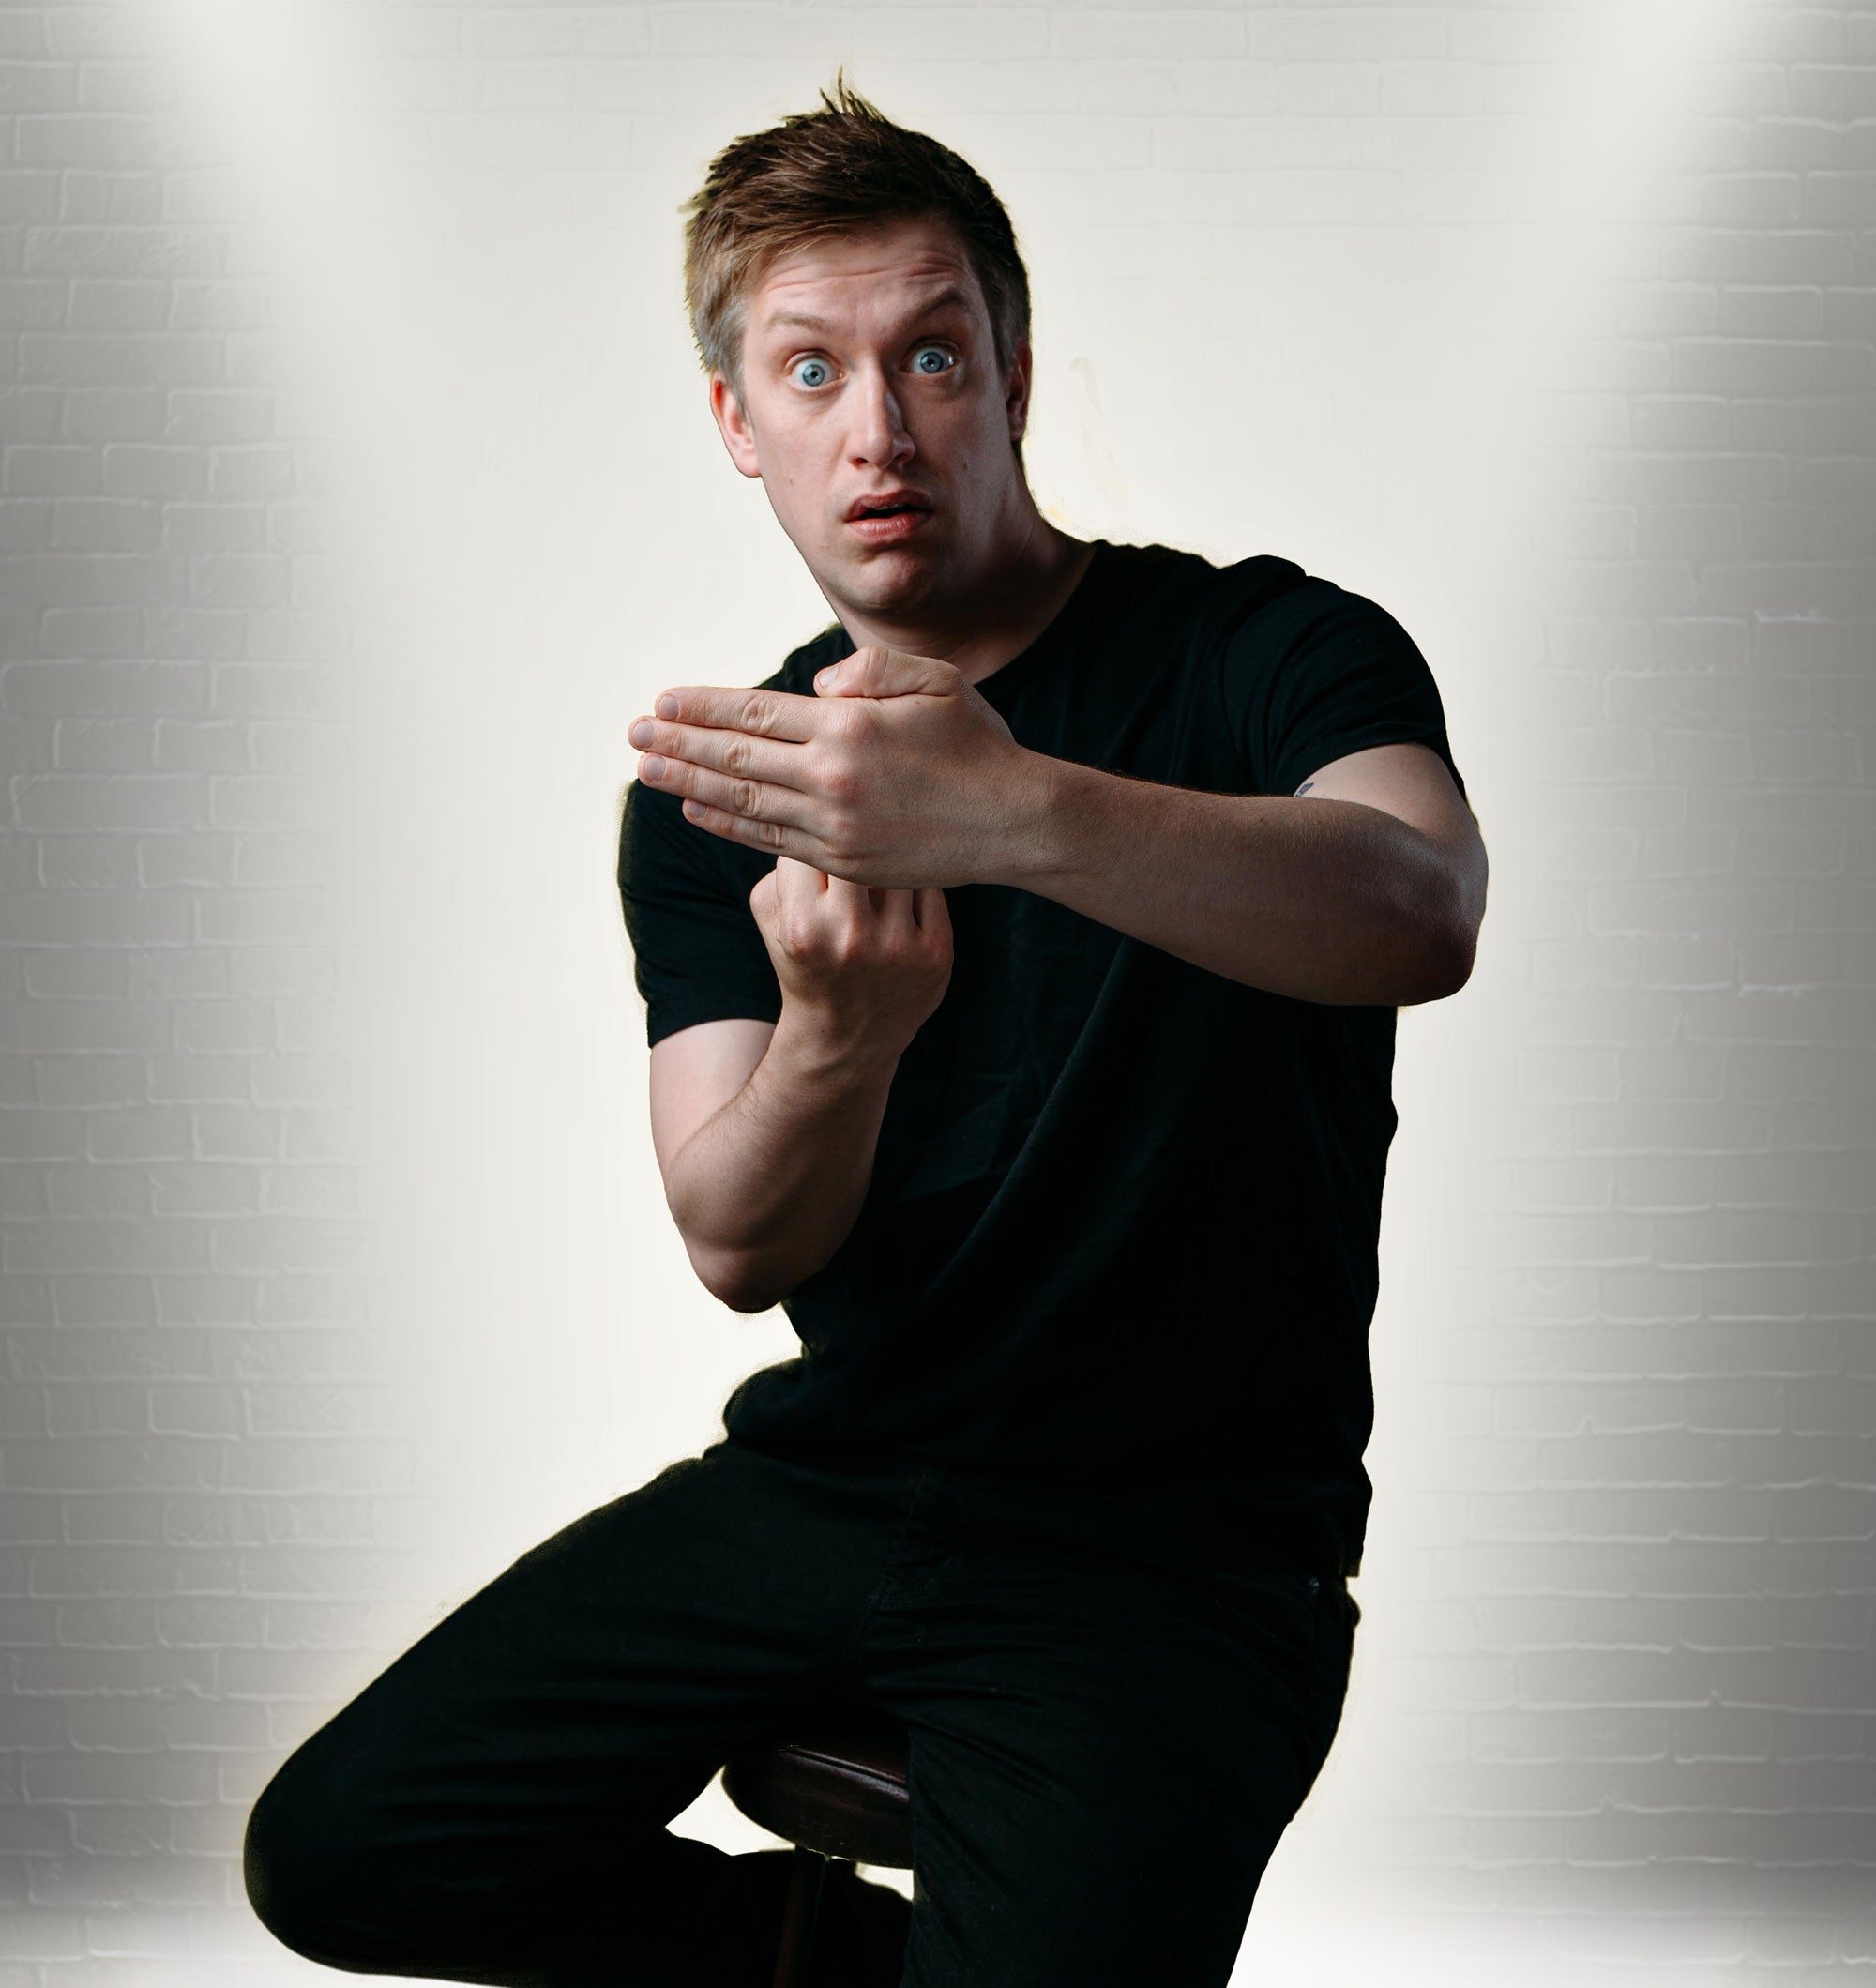 Daniel Sloss - Can't in London promo photo for Priority from O2 presale offer code